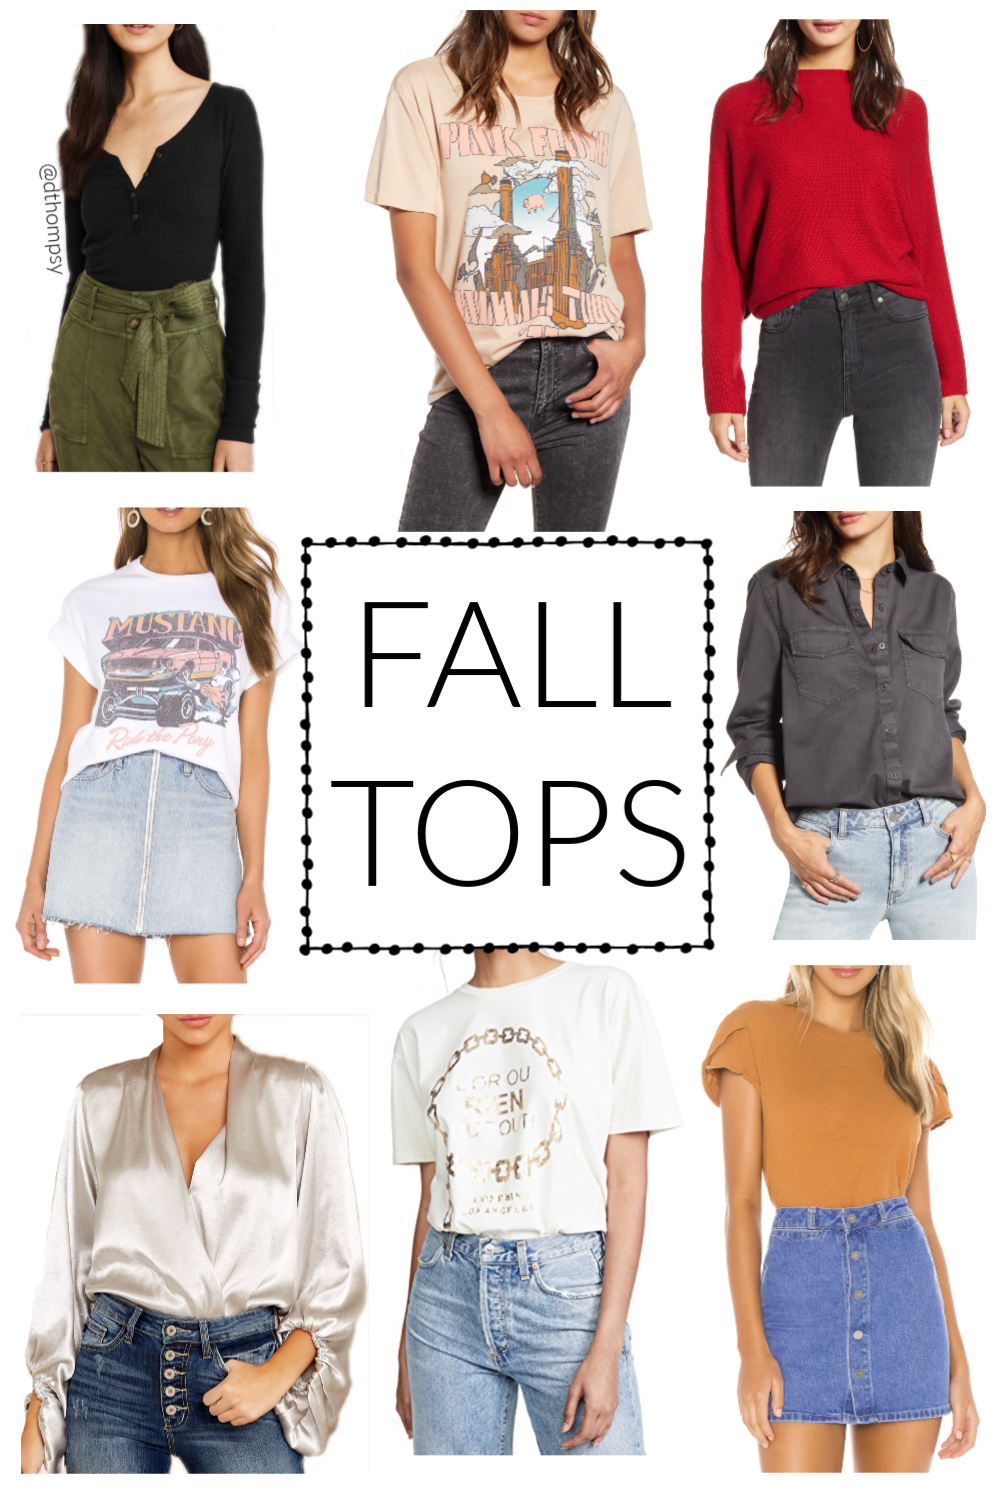 Fall Tops For Every Style - Lifestyle Blog by Truly Destiny